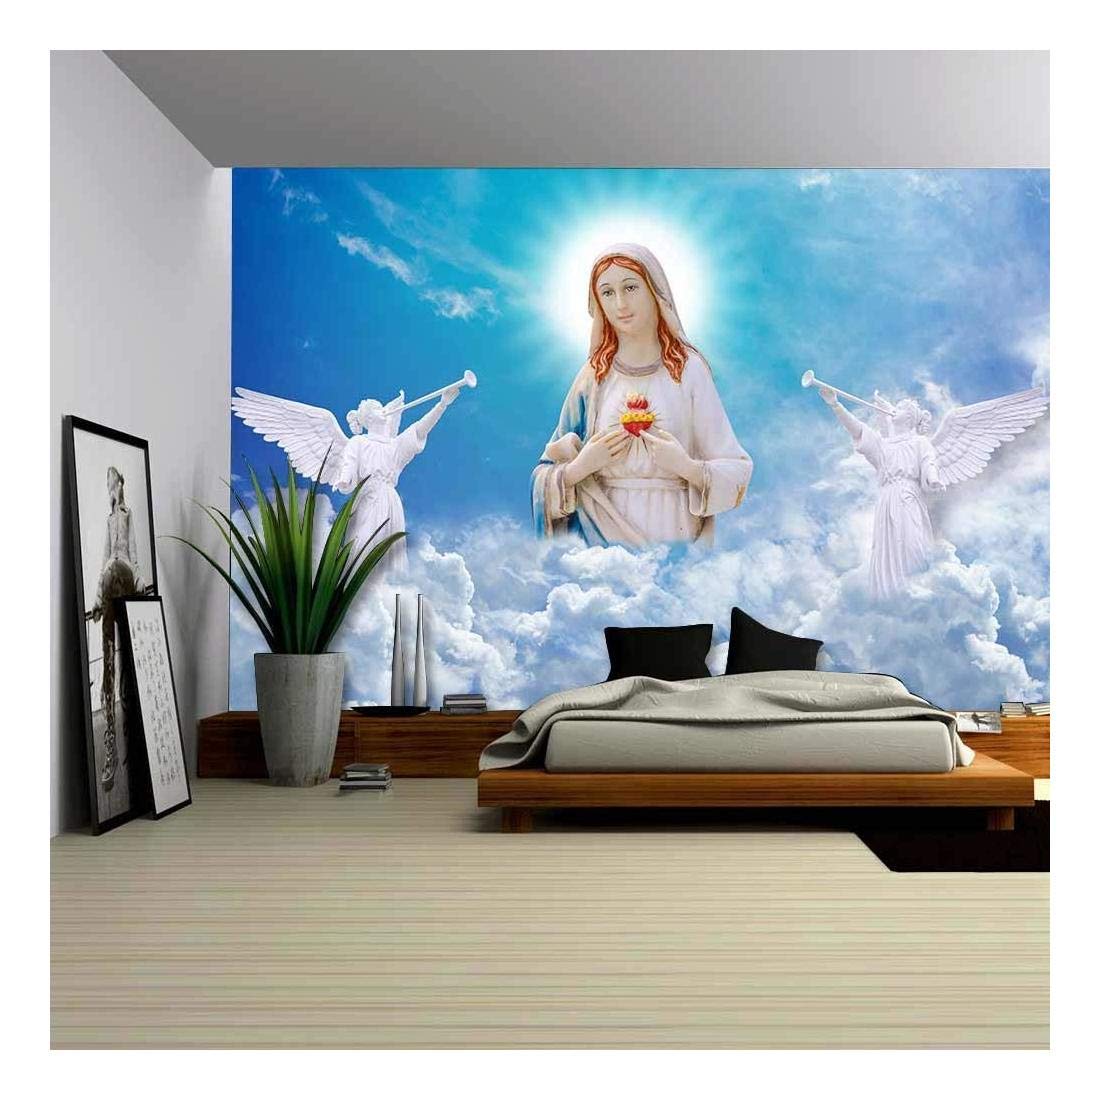 wall26 - Mother Mary in Heaven - Canvas Art Wall Mural Decor - 100"x144"